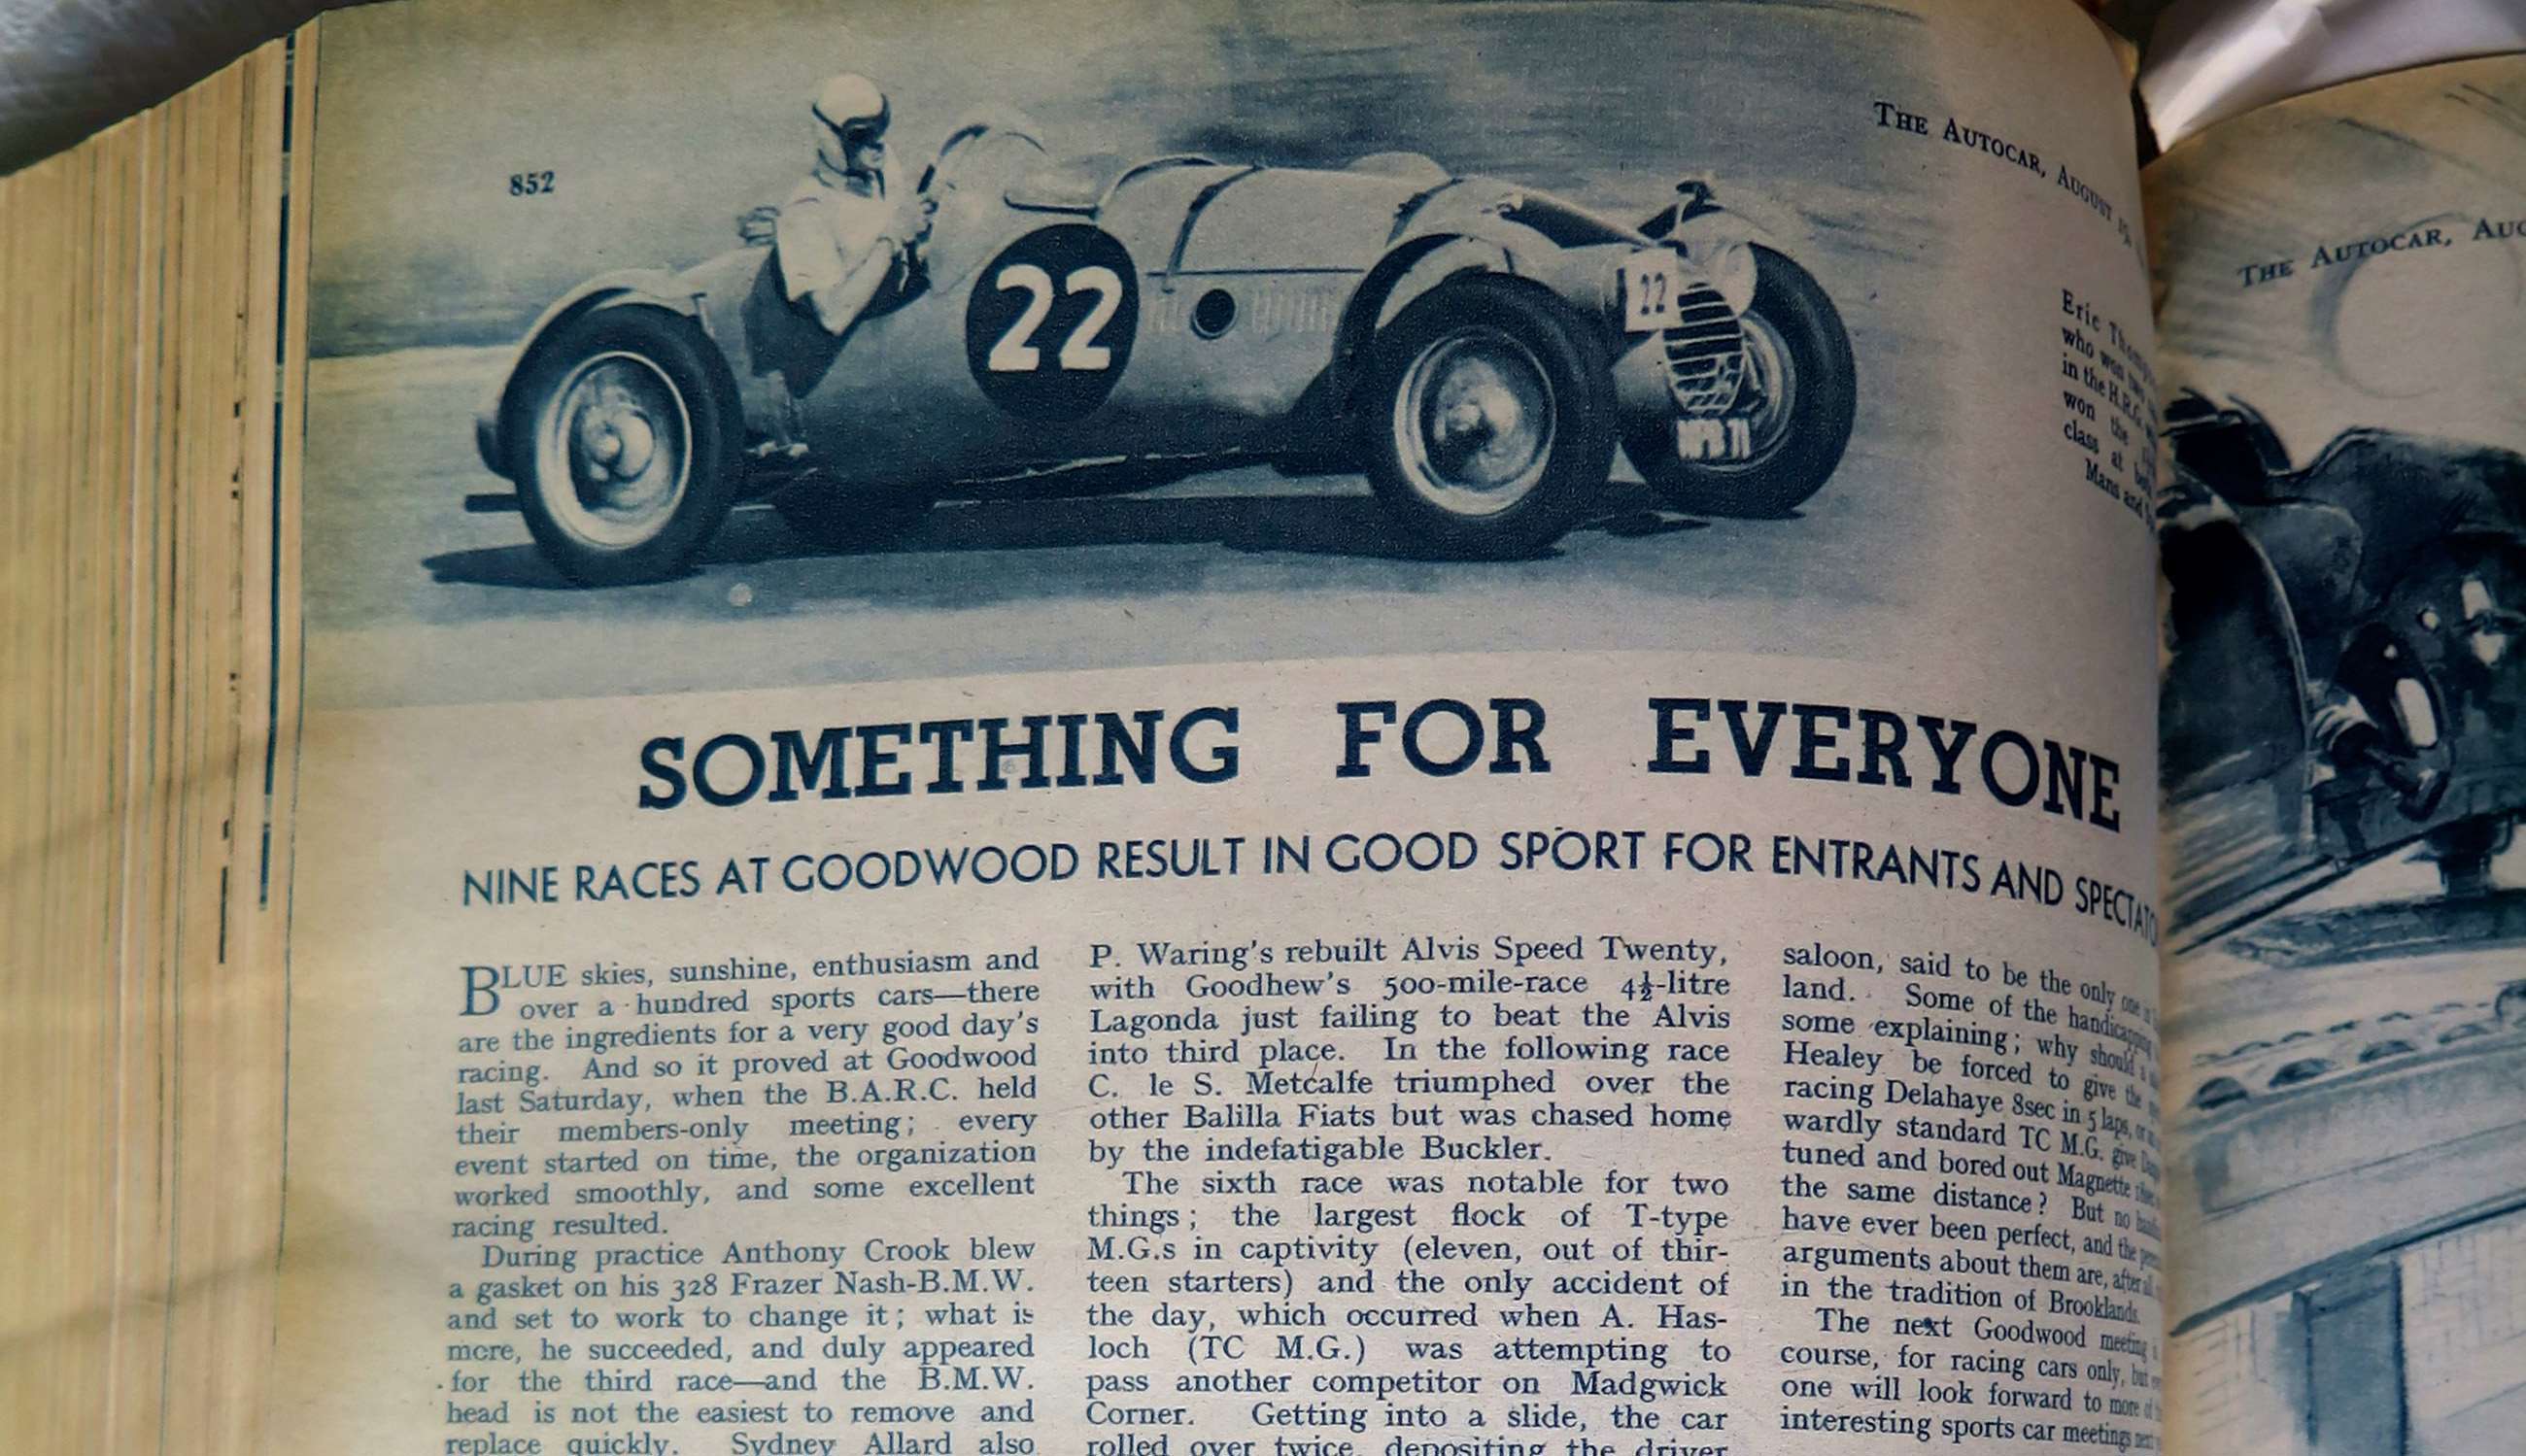 Eric Thompson in the Spa and Le Mans 24-Hour HRG Lightweight with which he won two of the nine races at Goodwood MM1 - from ‘The Autocar’s race report